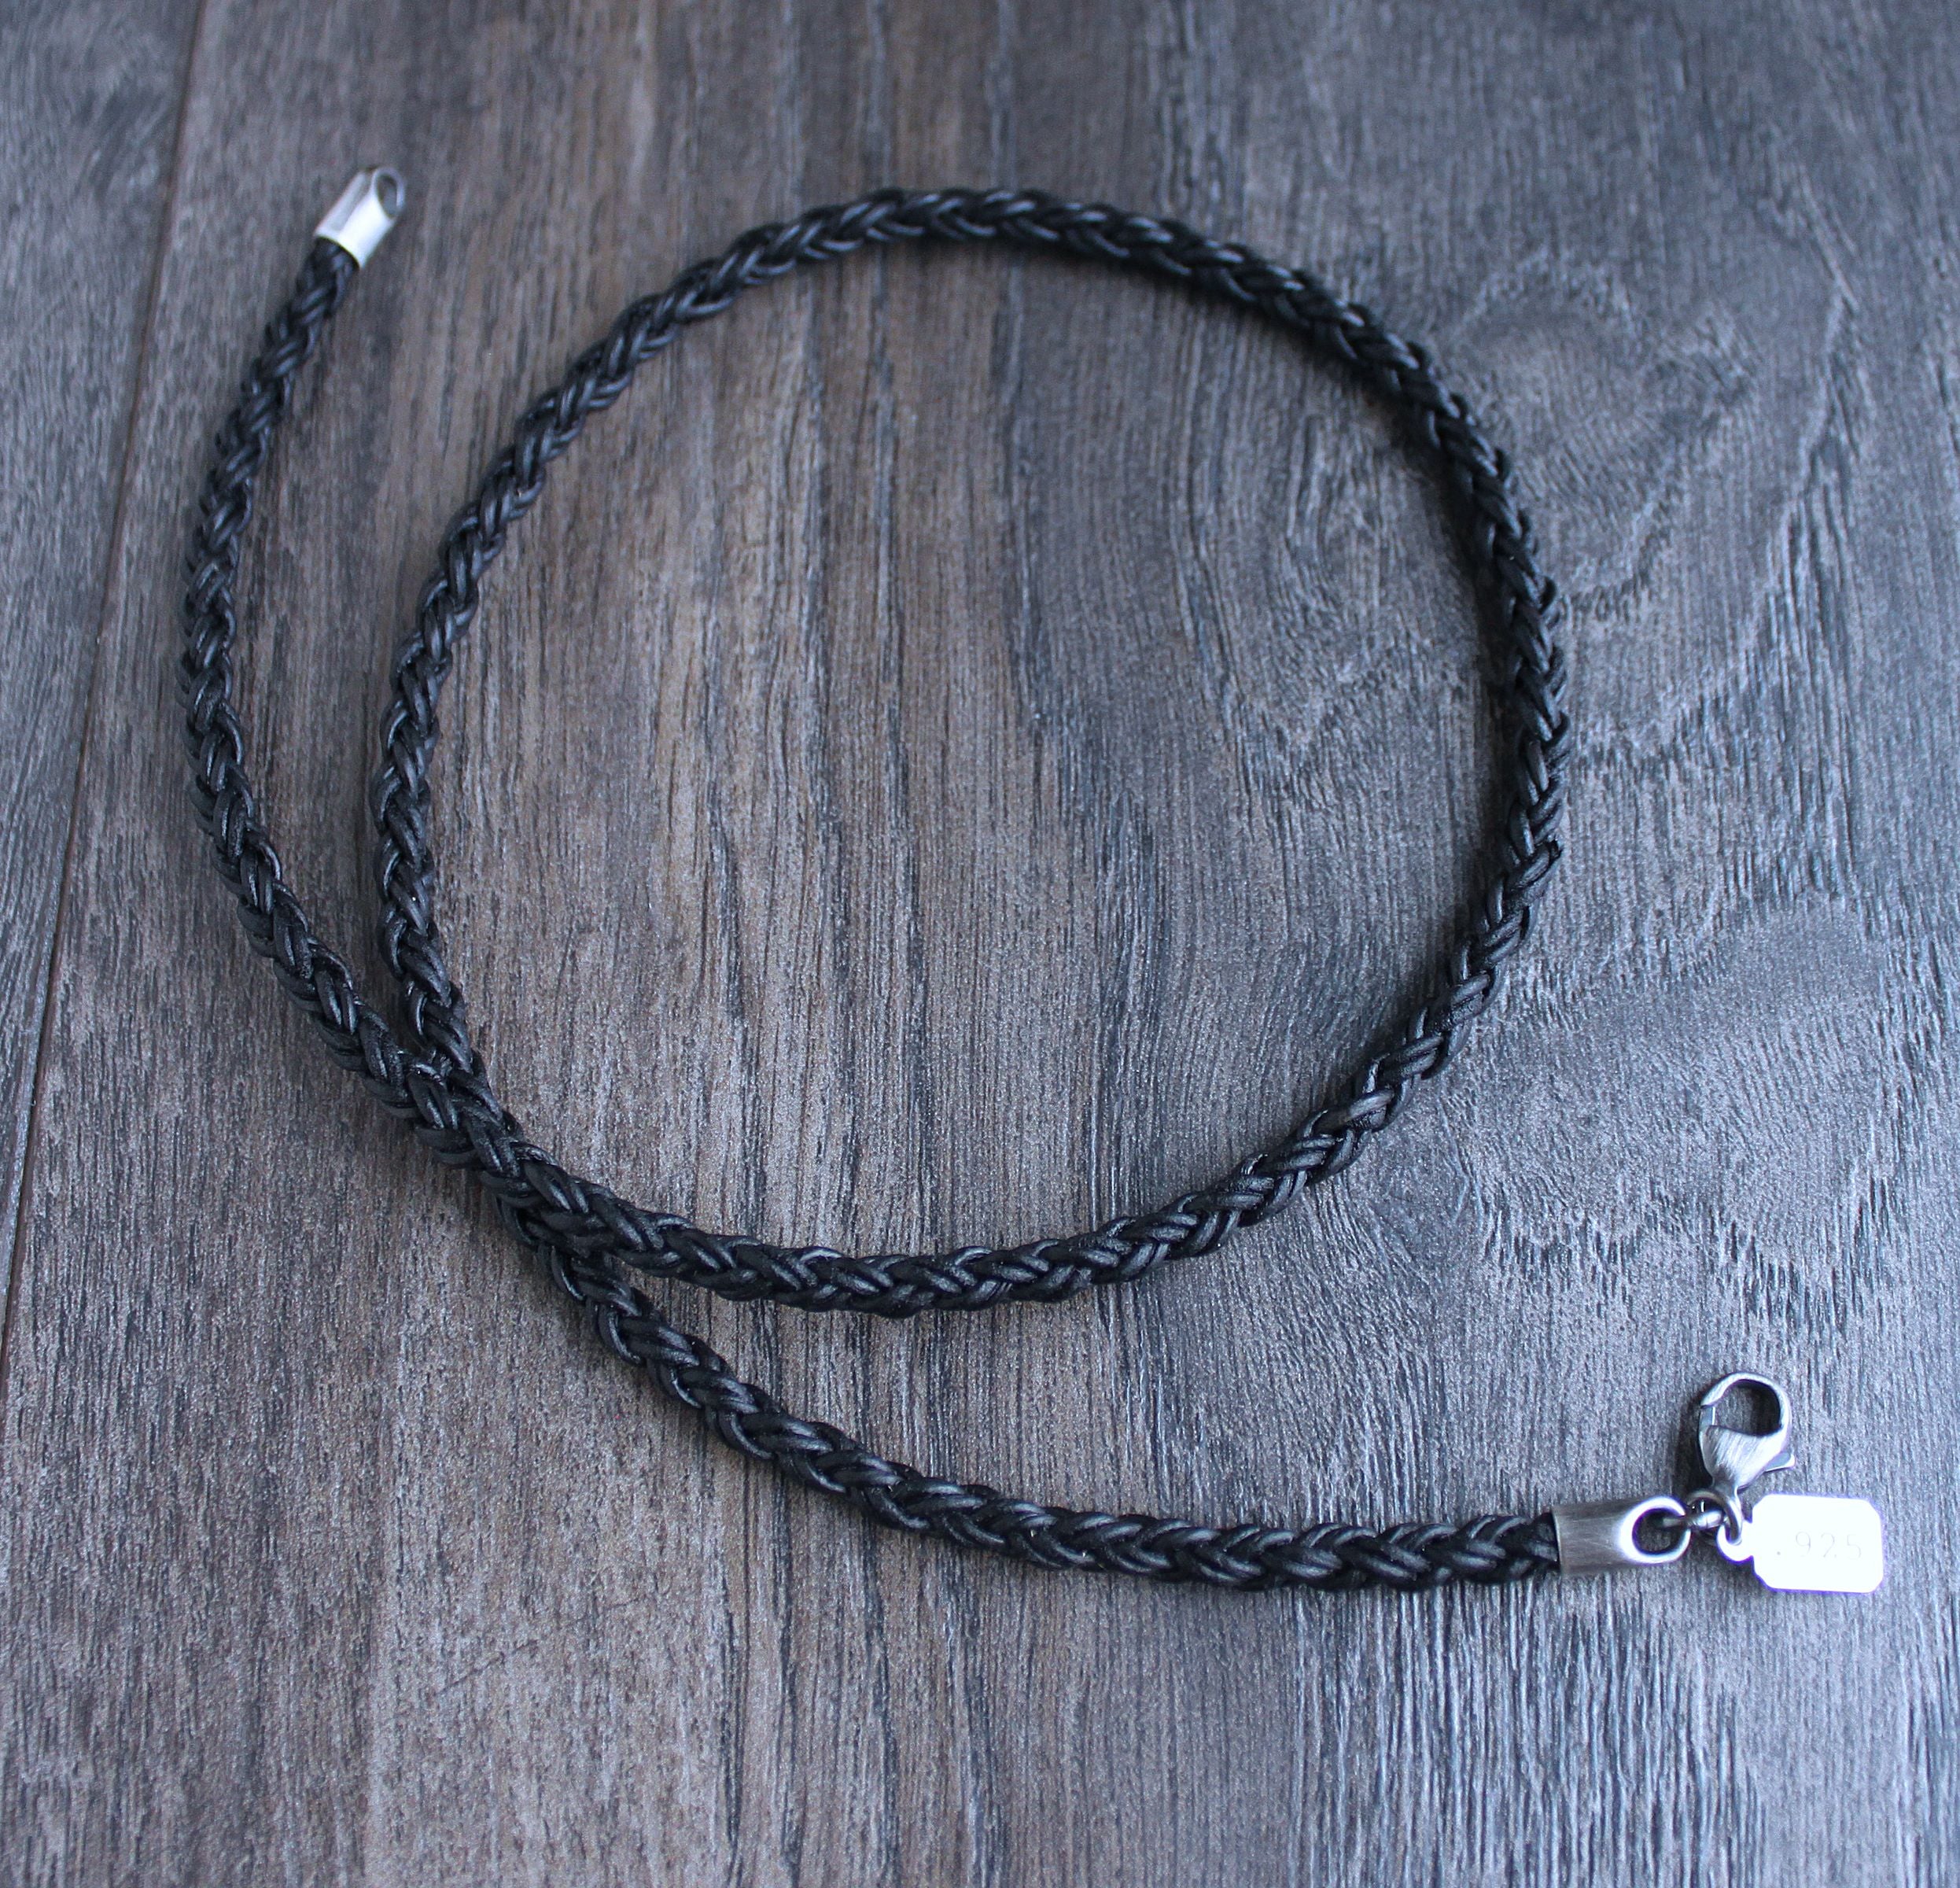 Leather necklace cords 2mm 13-36 inches